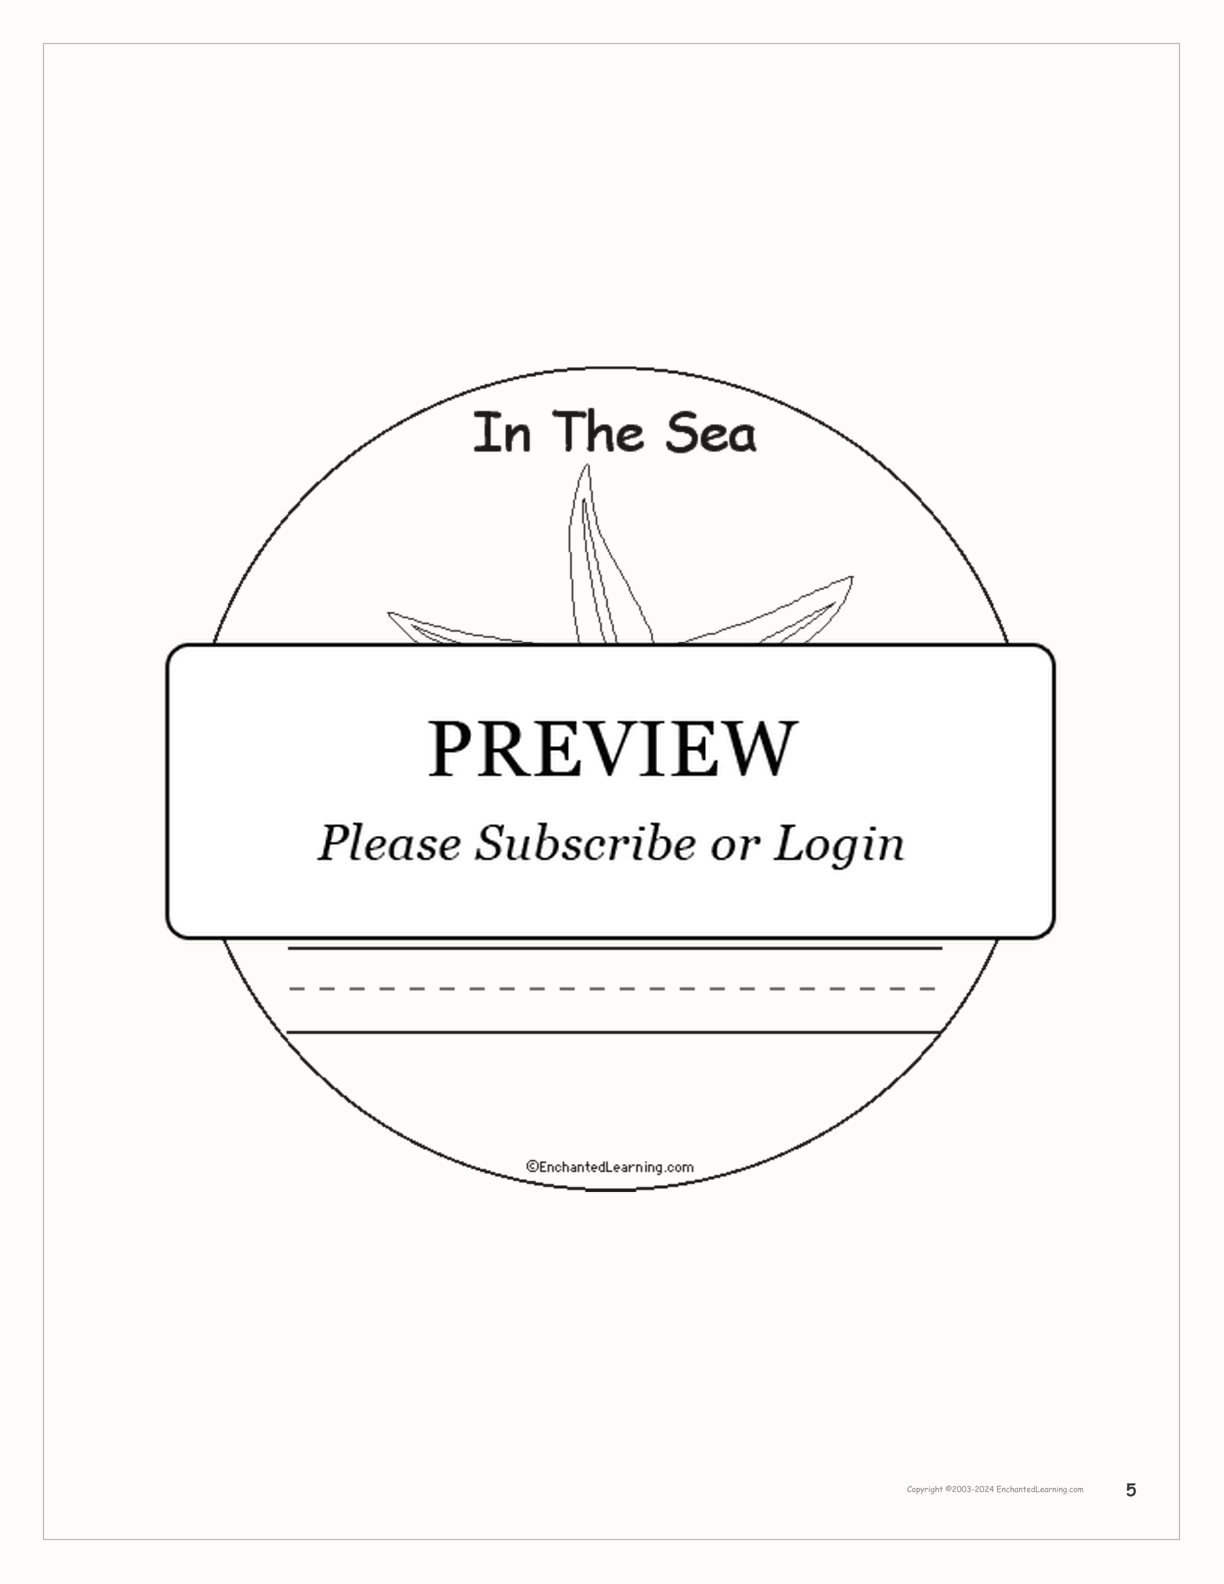 In The Sea: Early Reader Book interactive printout page 5